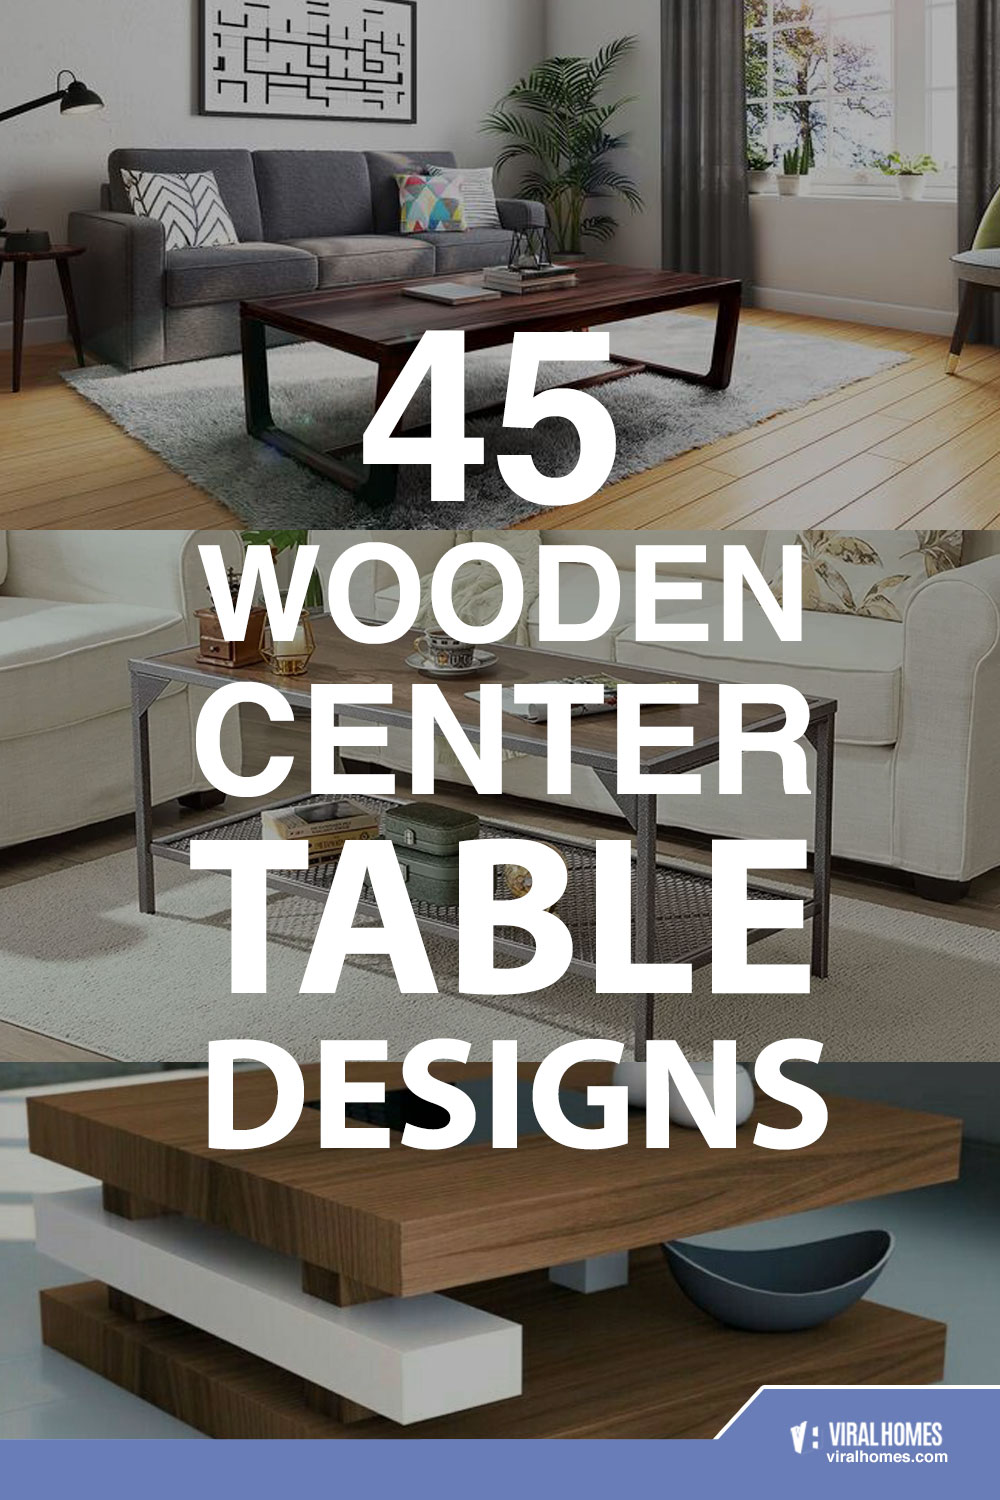 Gorgeous Wooden Center Table Designs to Grace Your Living Rooms